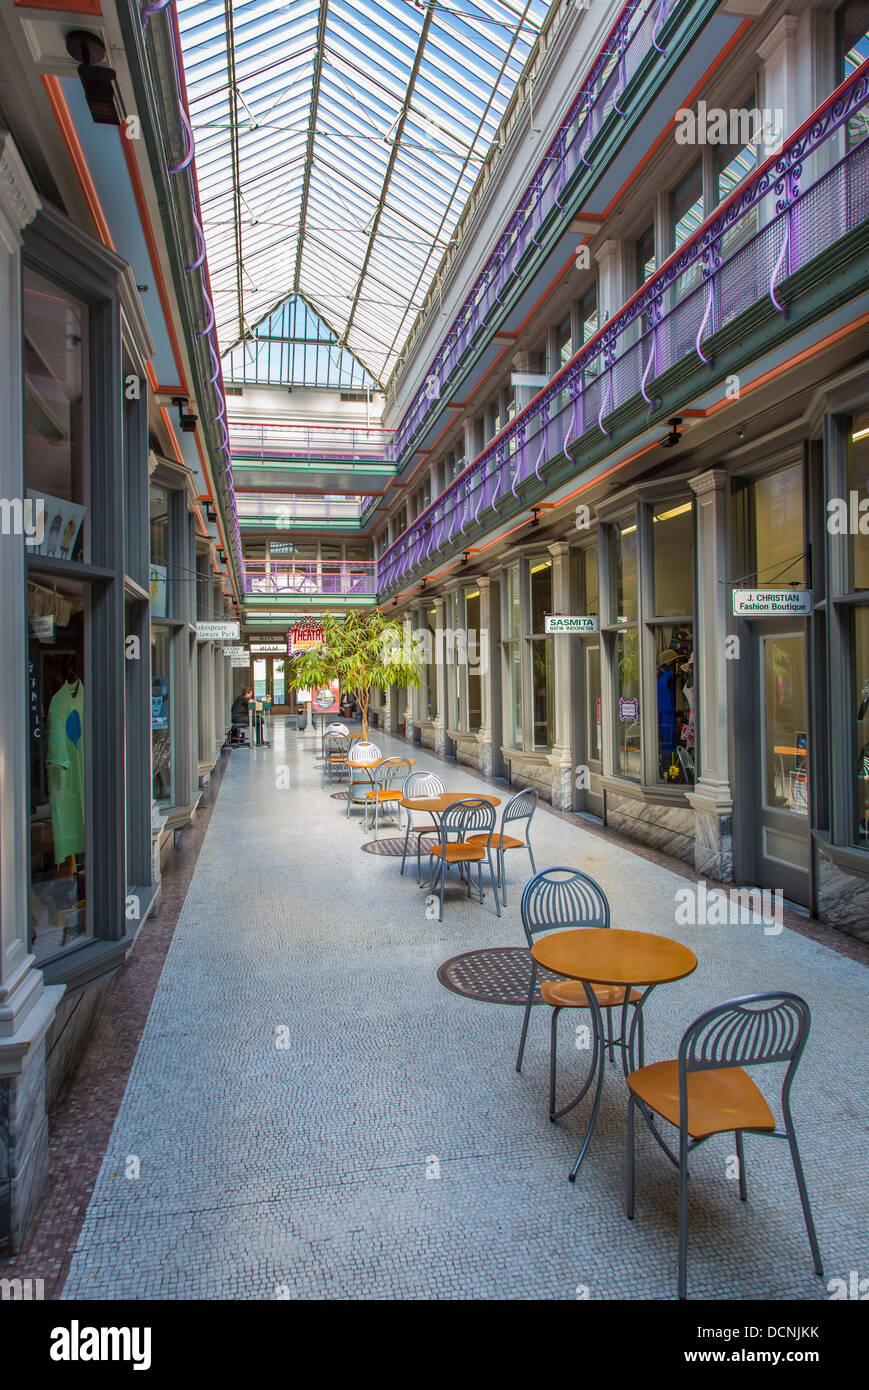 Interior of the Market Arcade designed by Edward B. Green built in 1892 ...